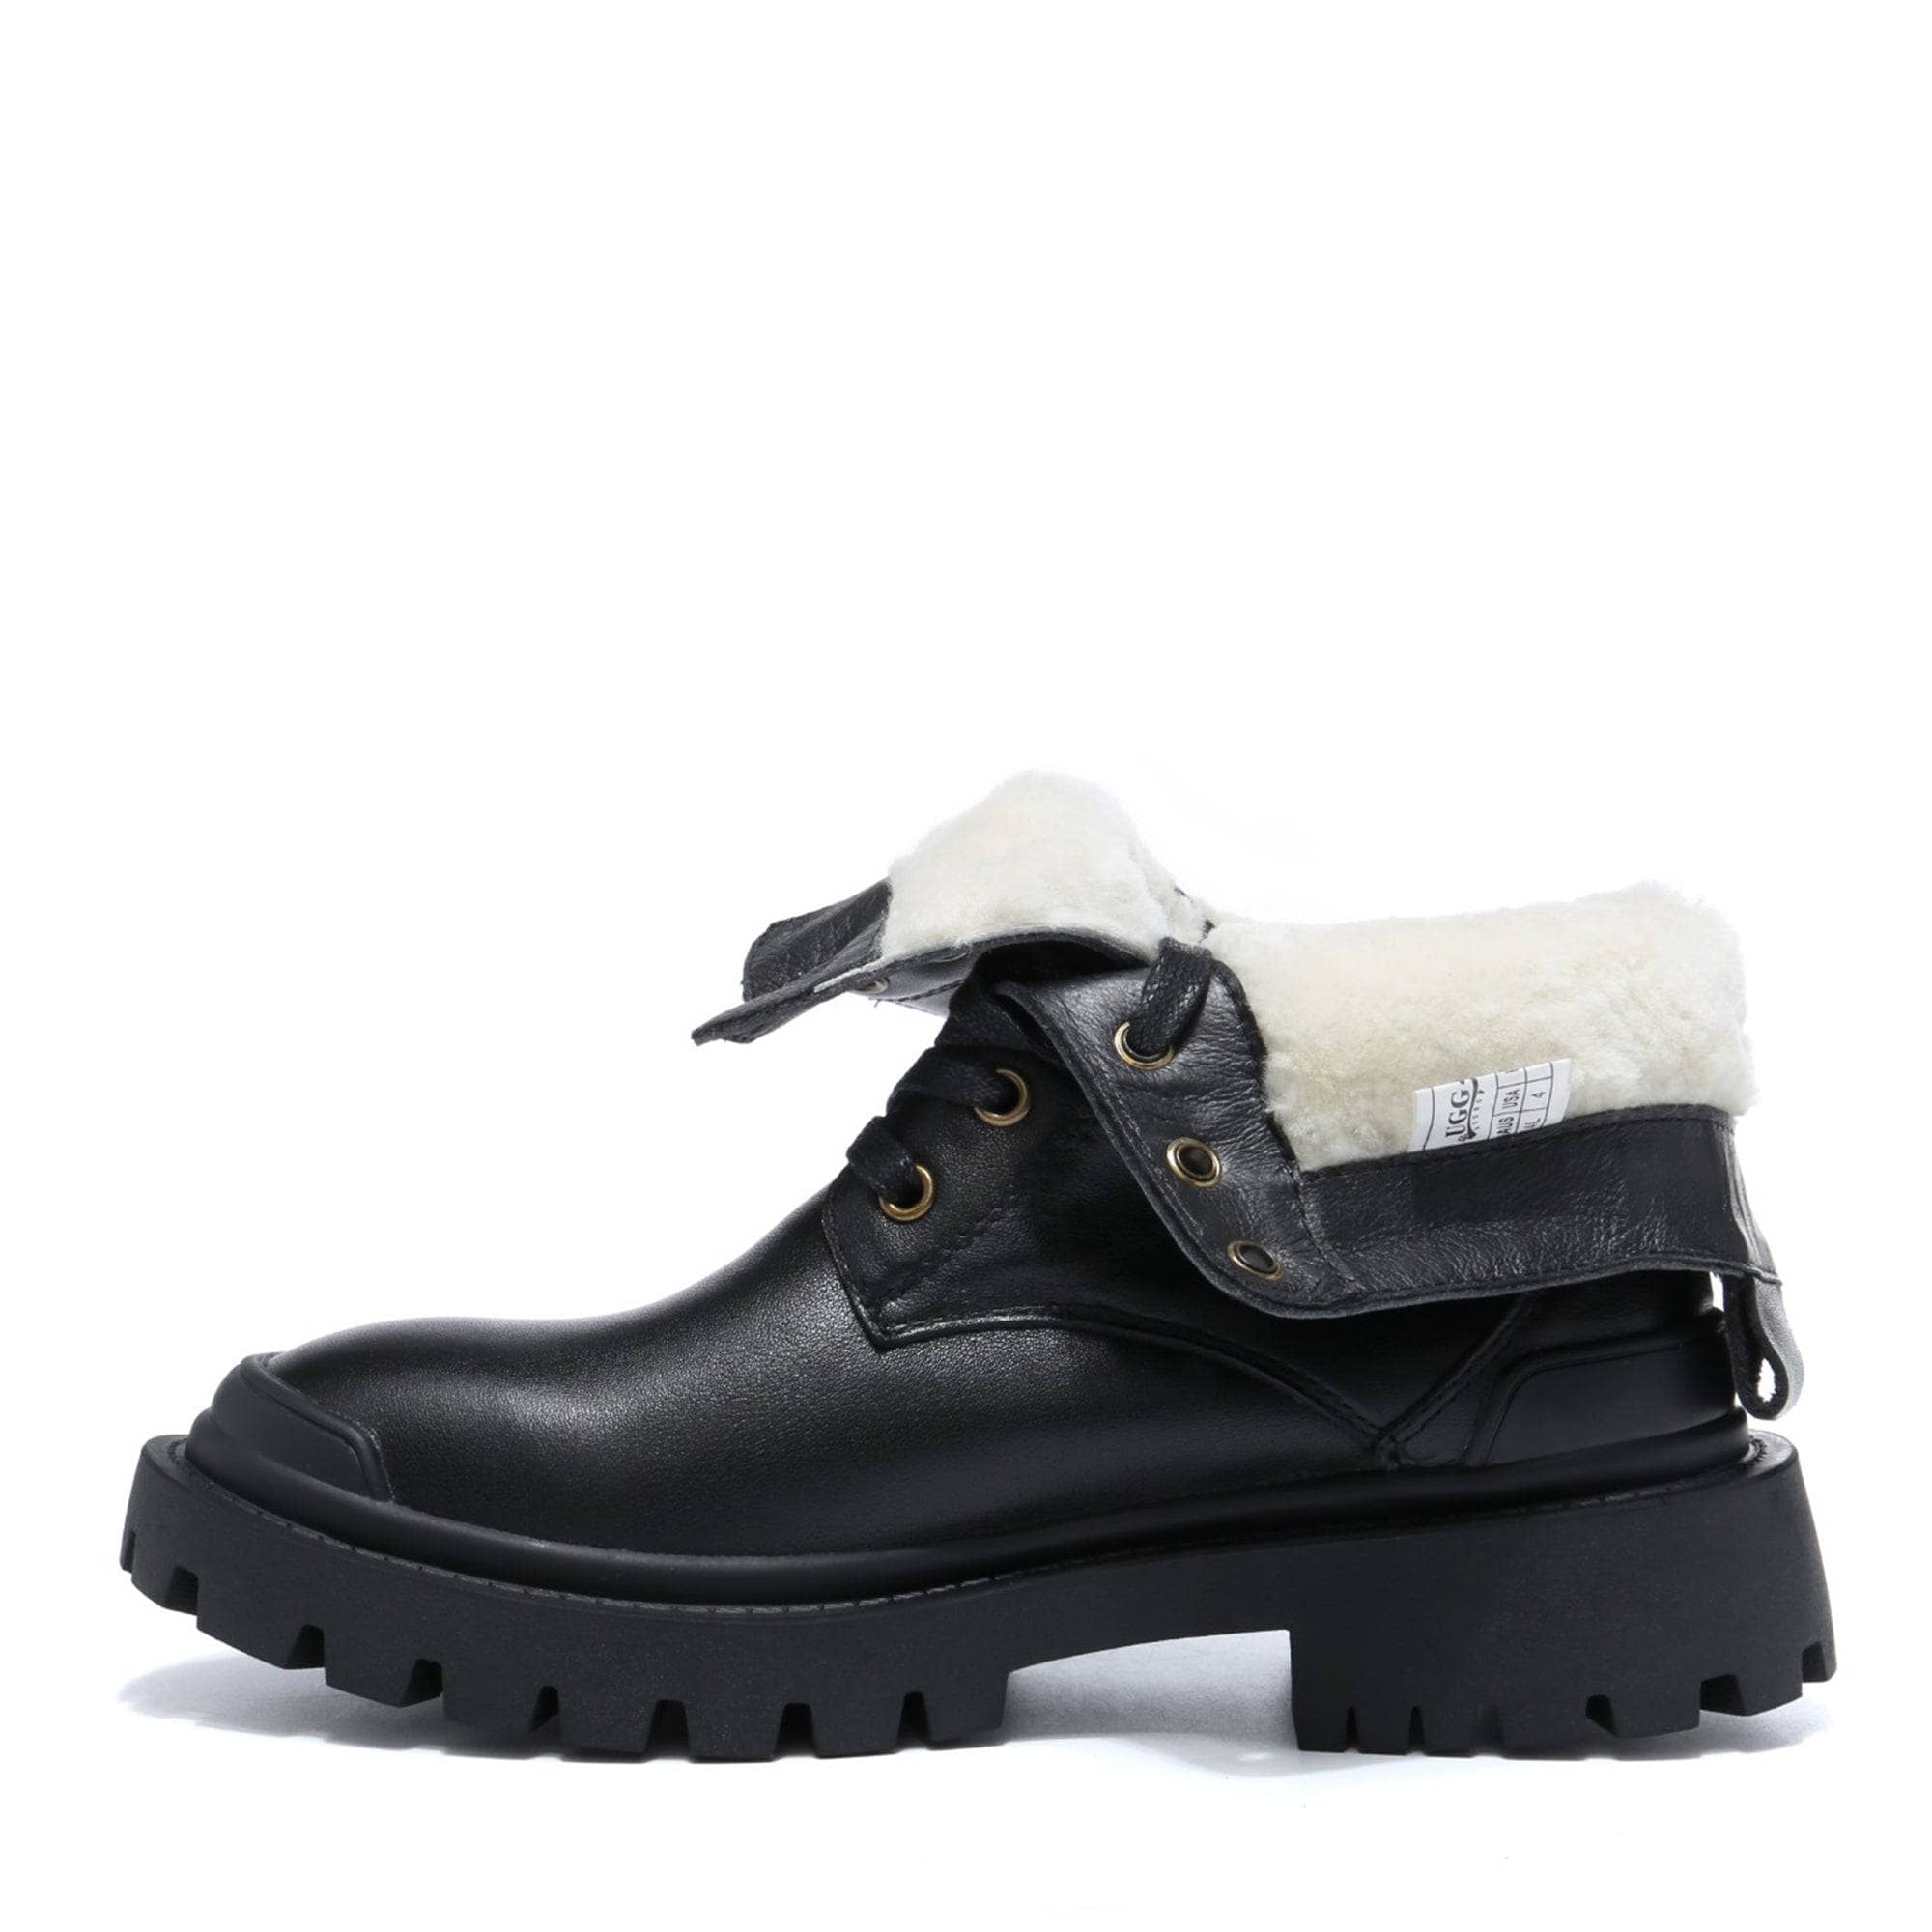 Leather Ugg Boots - UGG Ivanna Laced Up Leather Boots - Original UGG Australia Classic